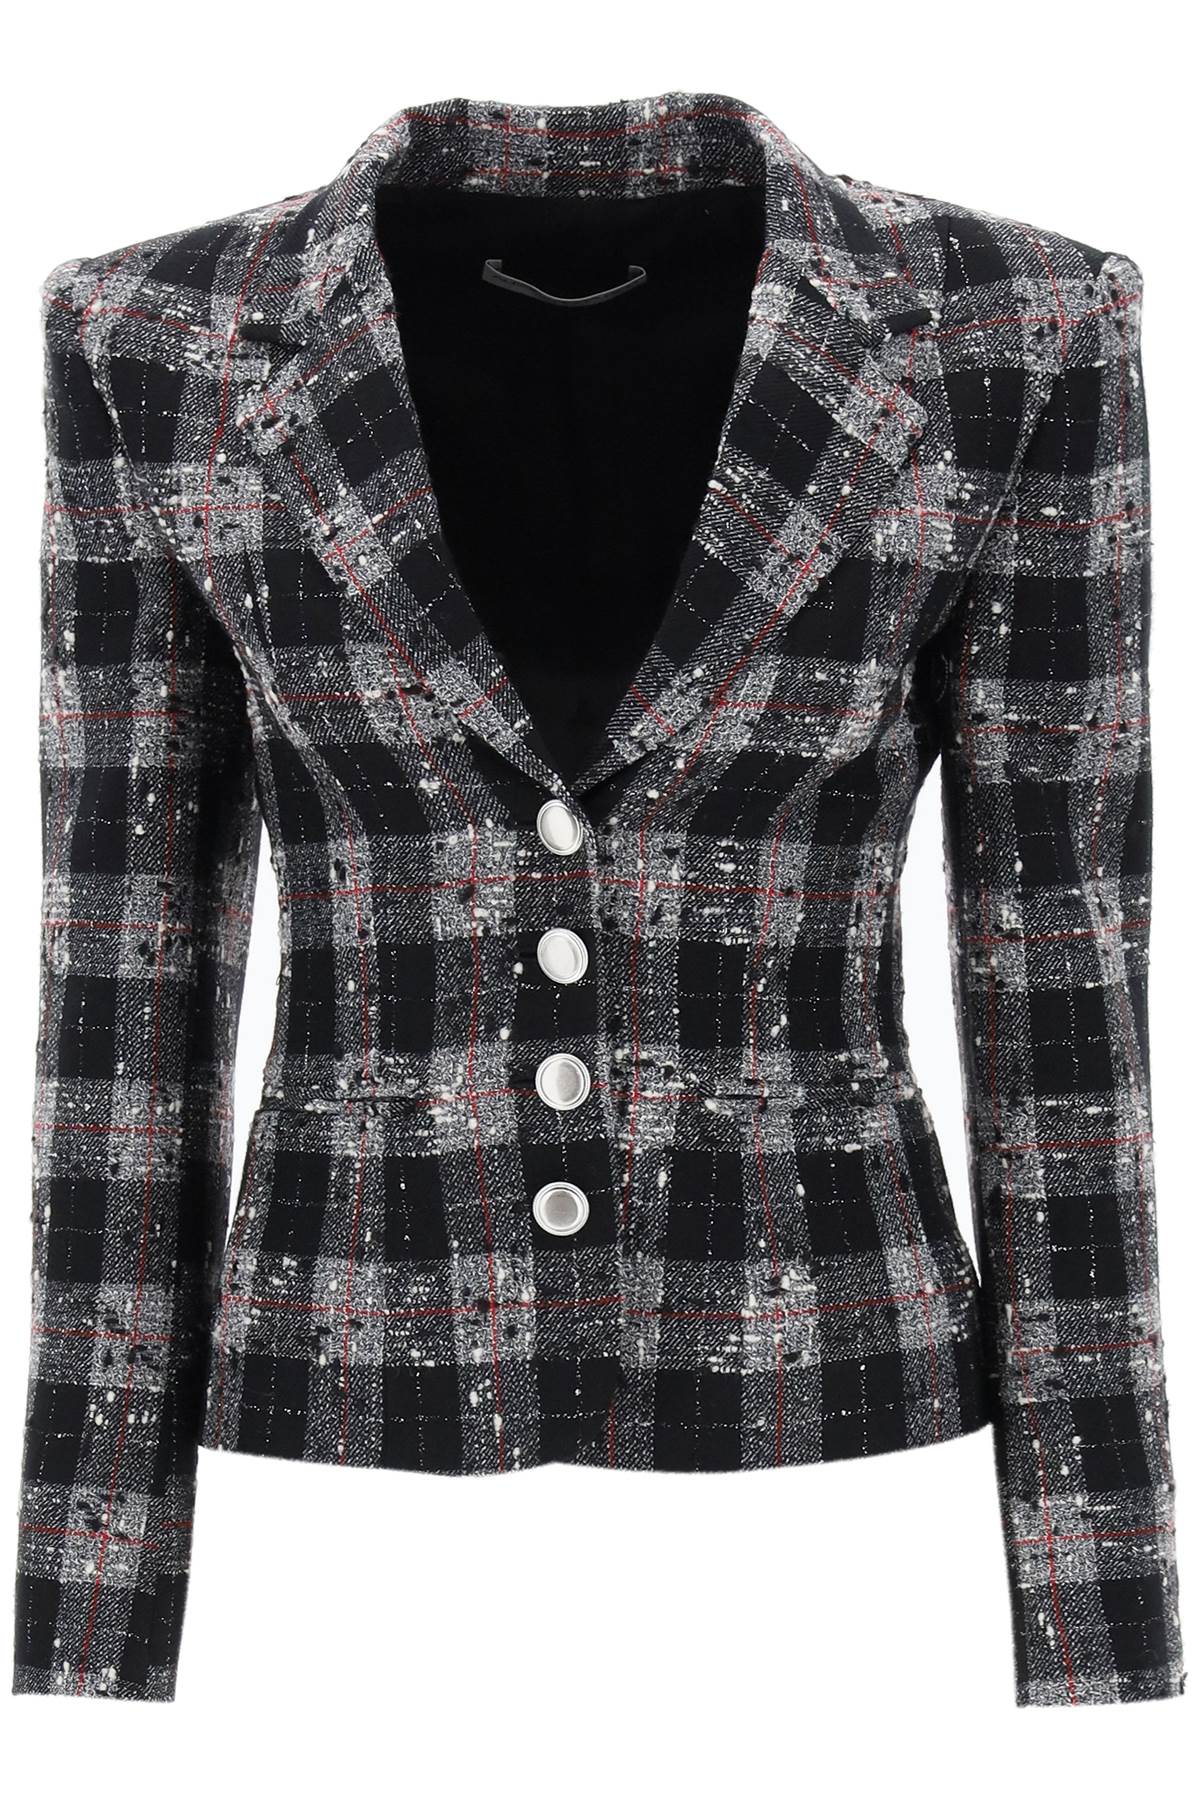 Alessandra rich single-breasted jacket in boucle' fabric with check motif-0